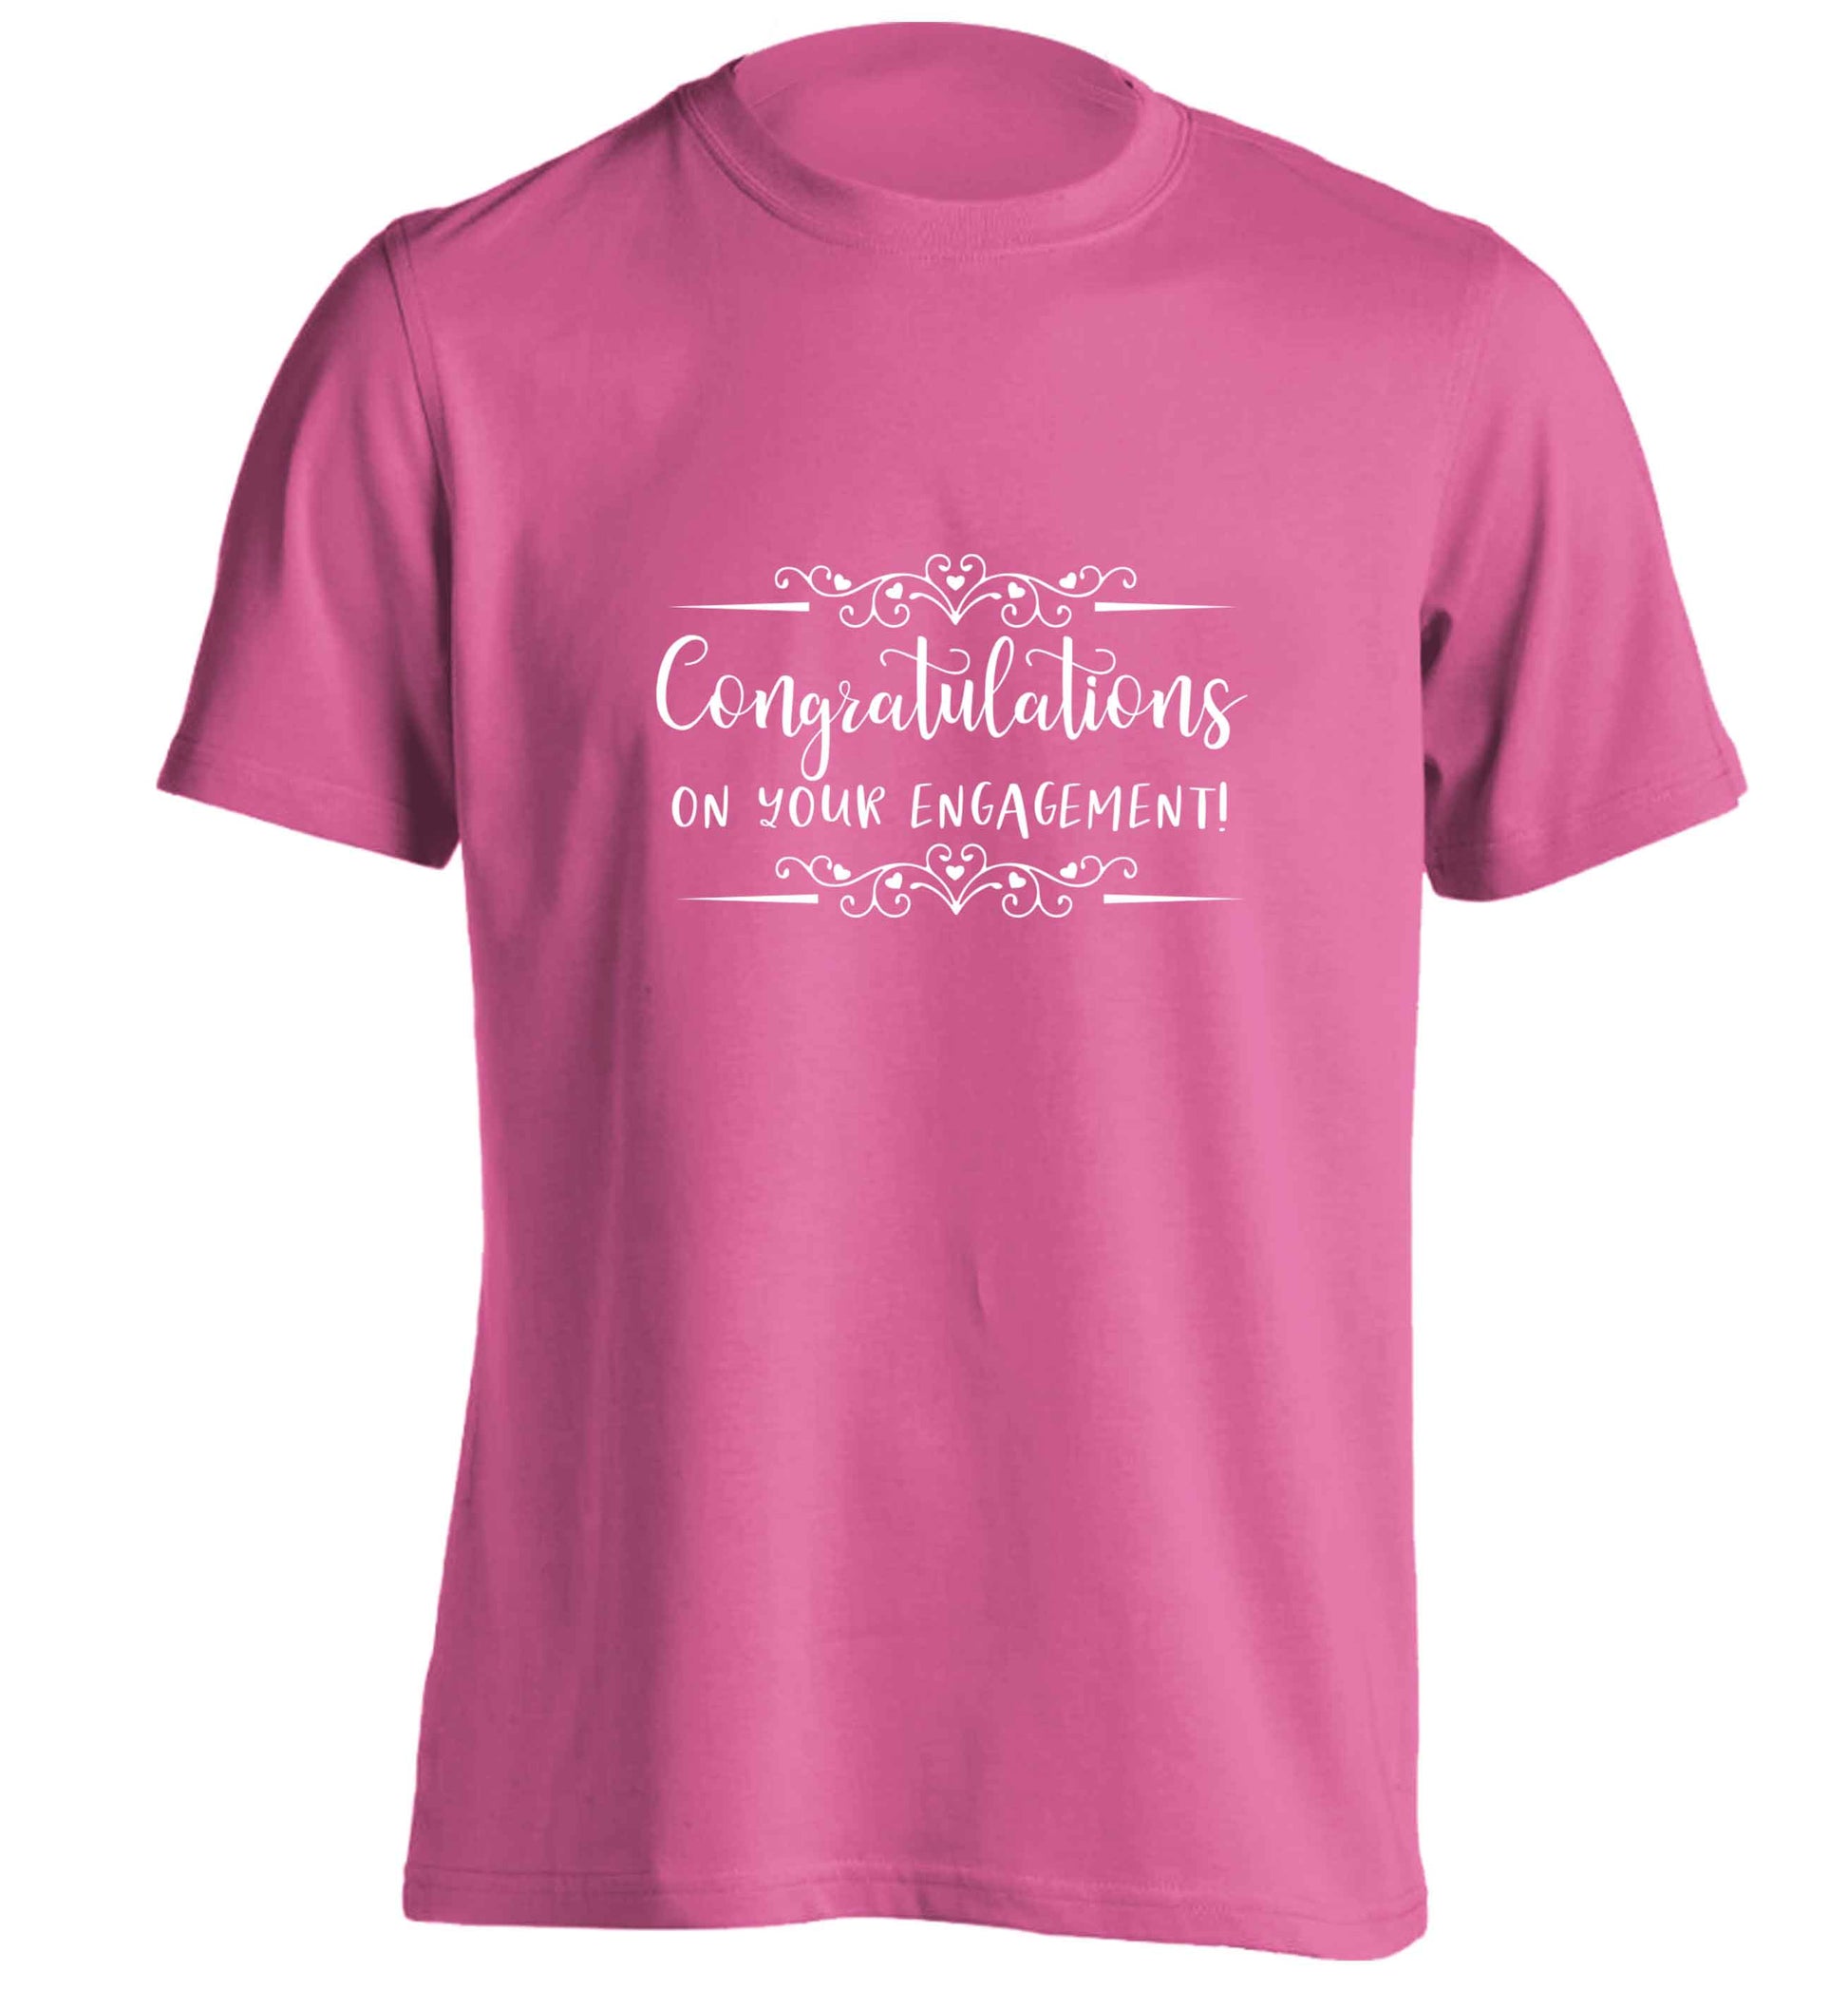 Congratulations on your engagement adults unisex pink Tshirt 2XL